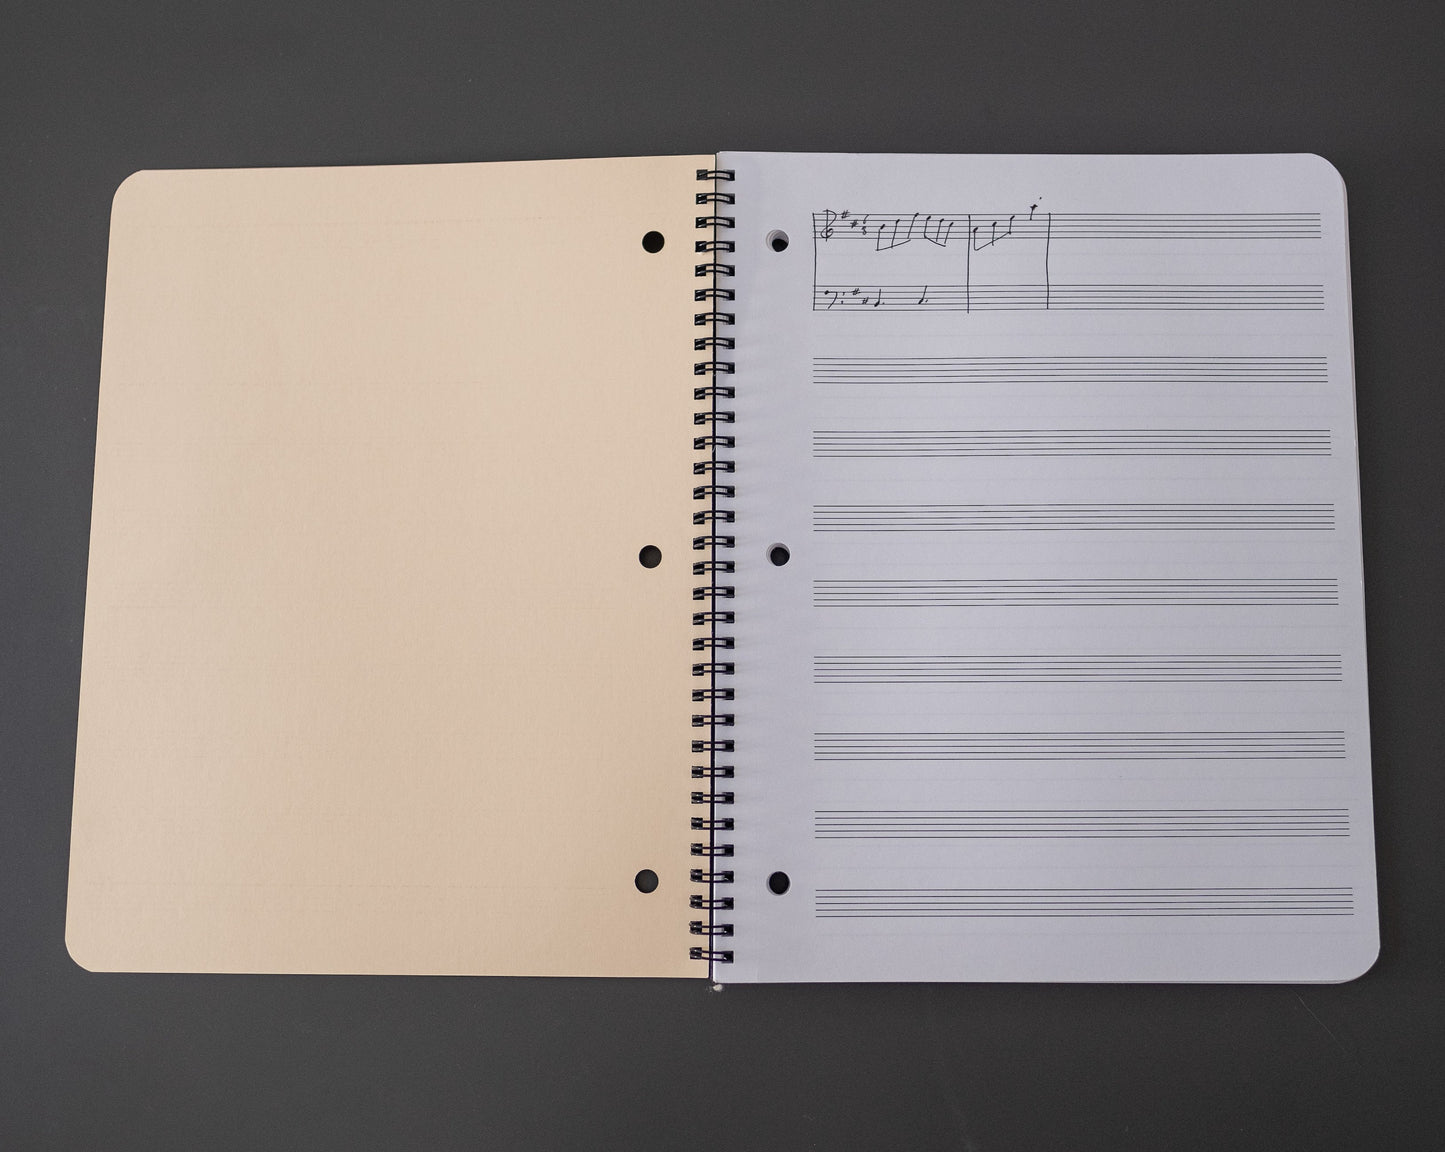 Musician's staff paper notebook, open to staff paper page, ruled edition, with spiral binding